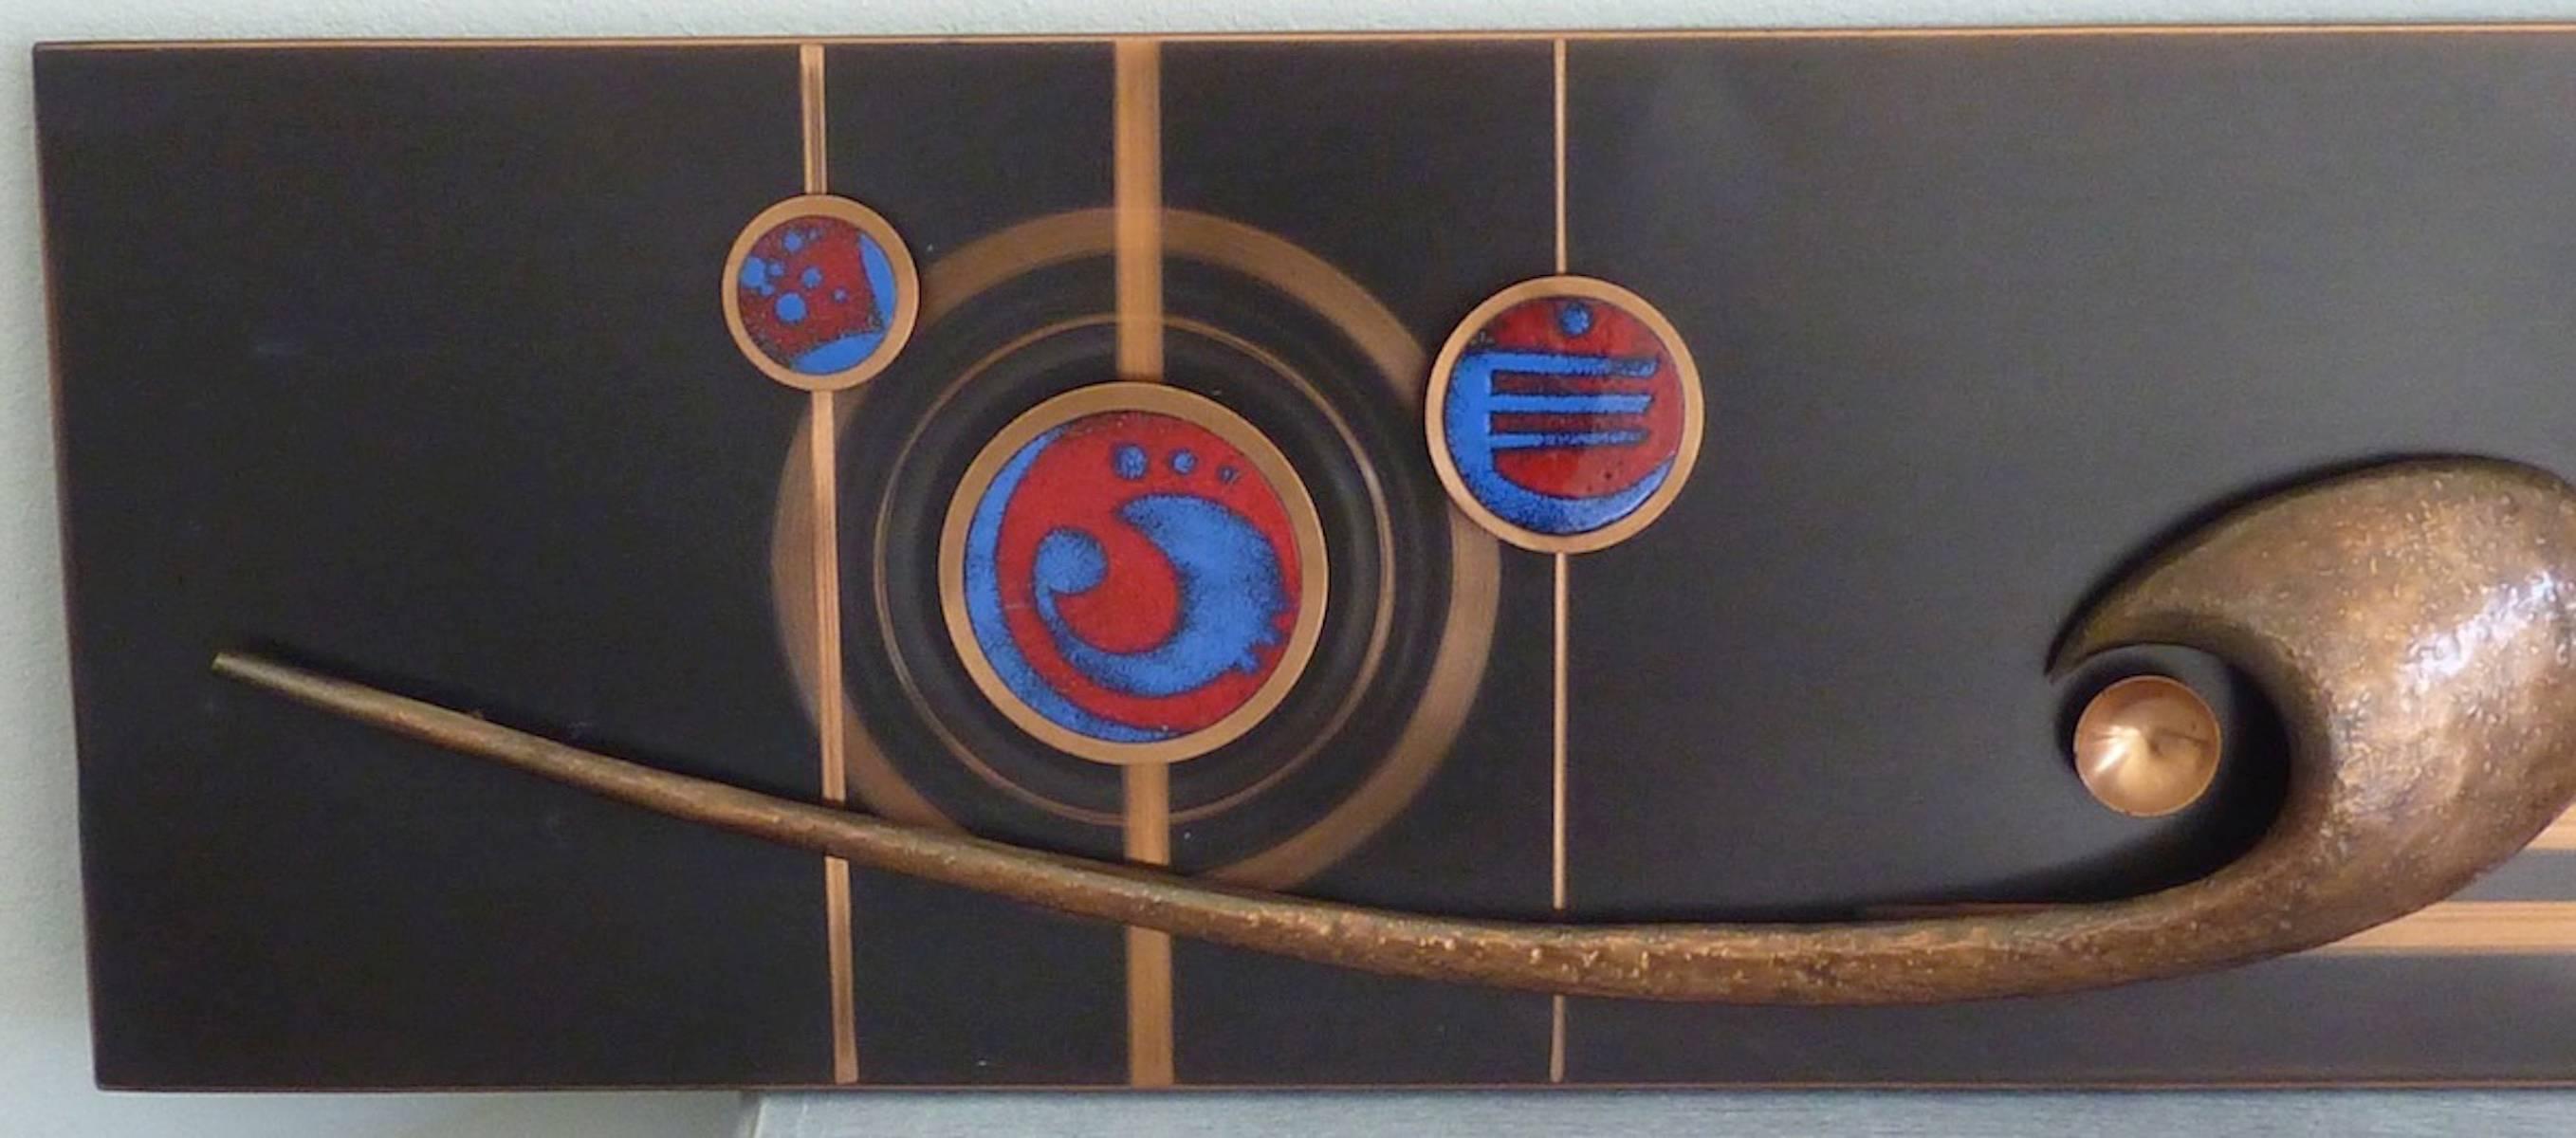 A beautiful, vintage large copper and enamel music themed wall decor. Measuring 57 x 13 inches it would make a beautiful ornament above a seating area. Vibrant colors and excellent craftsmanship. Also a great wall hanging for any office or waiting